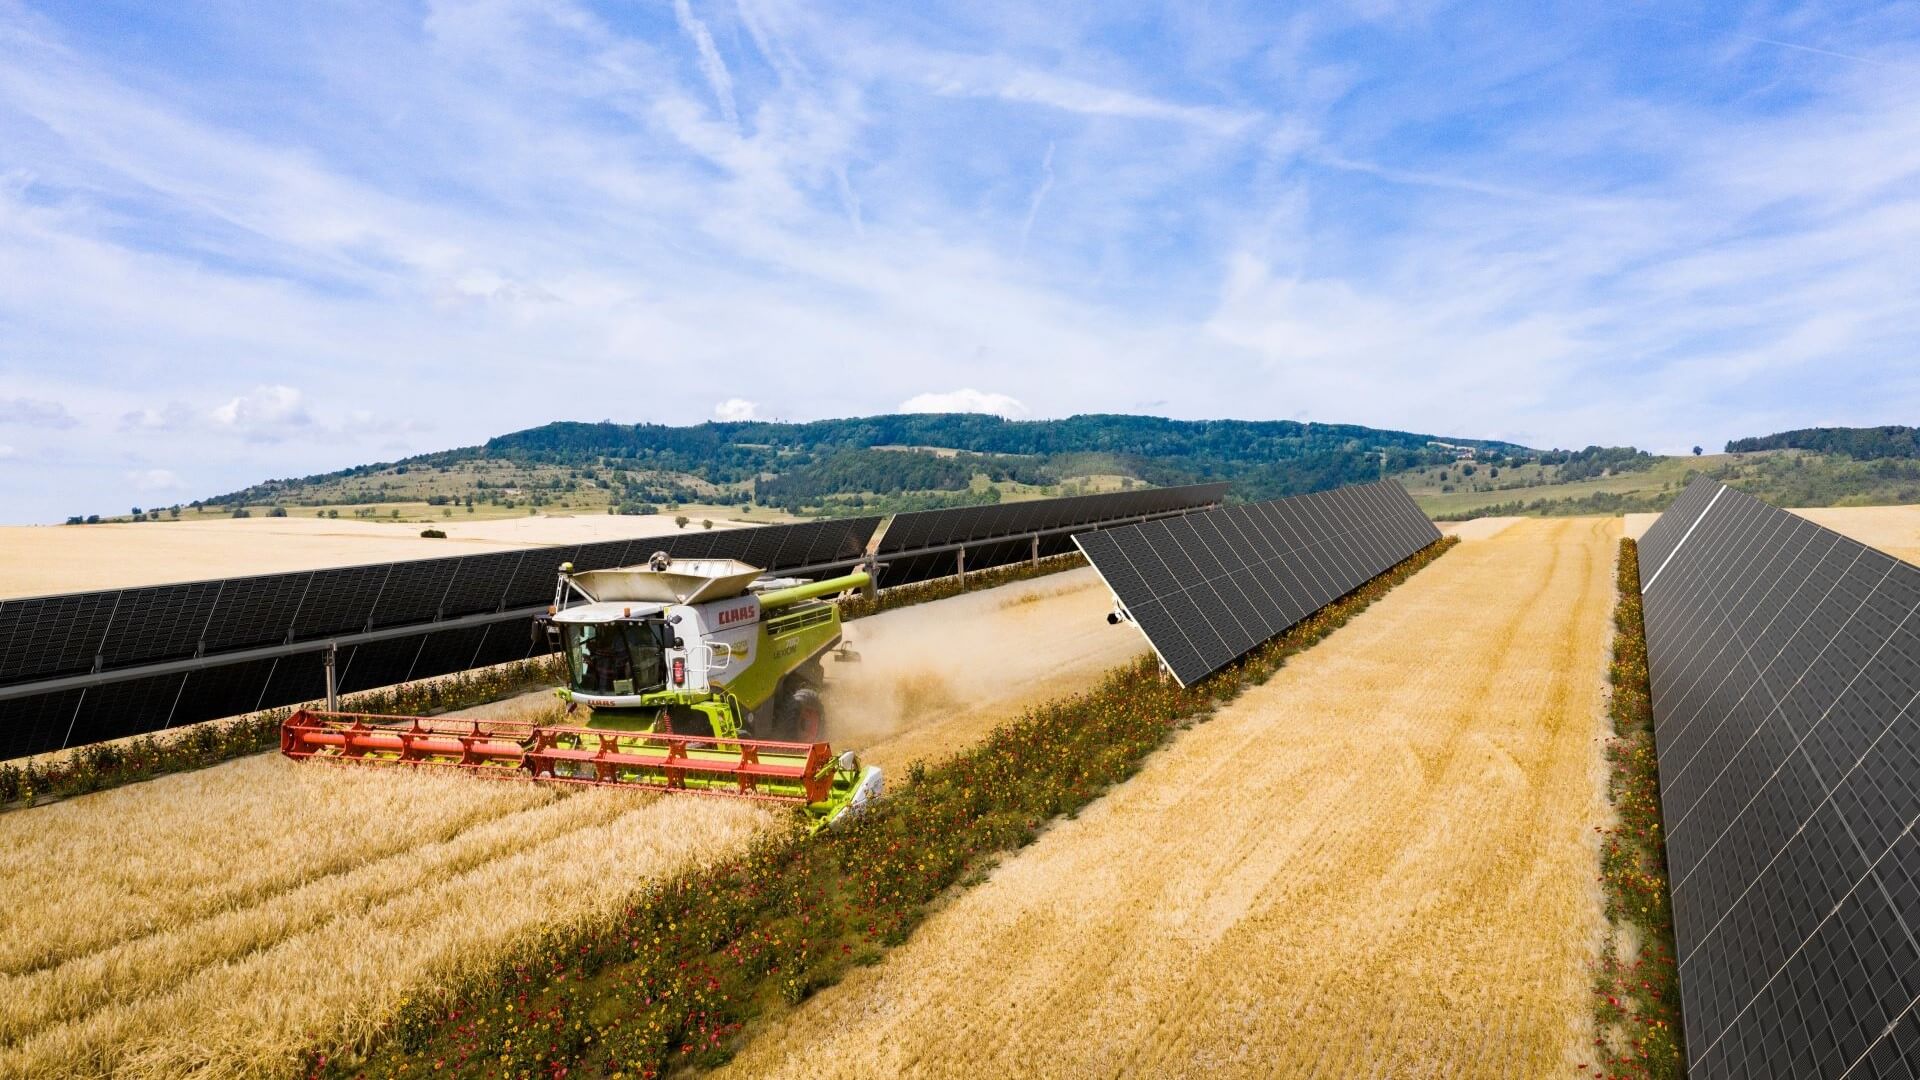 Rows of solar panels with combine harvester driving between two rows, harvesting grain crop